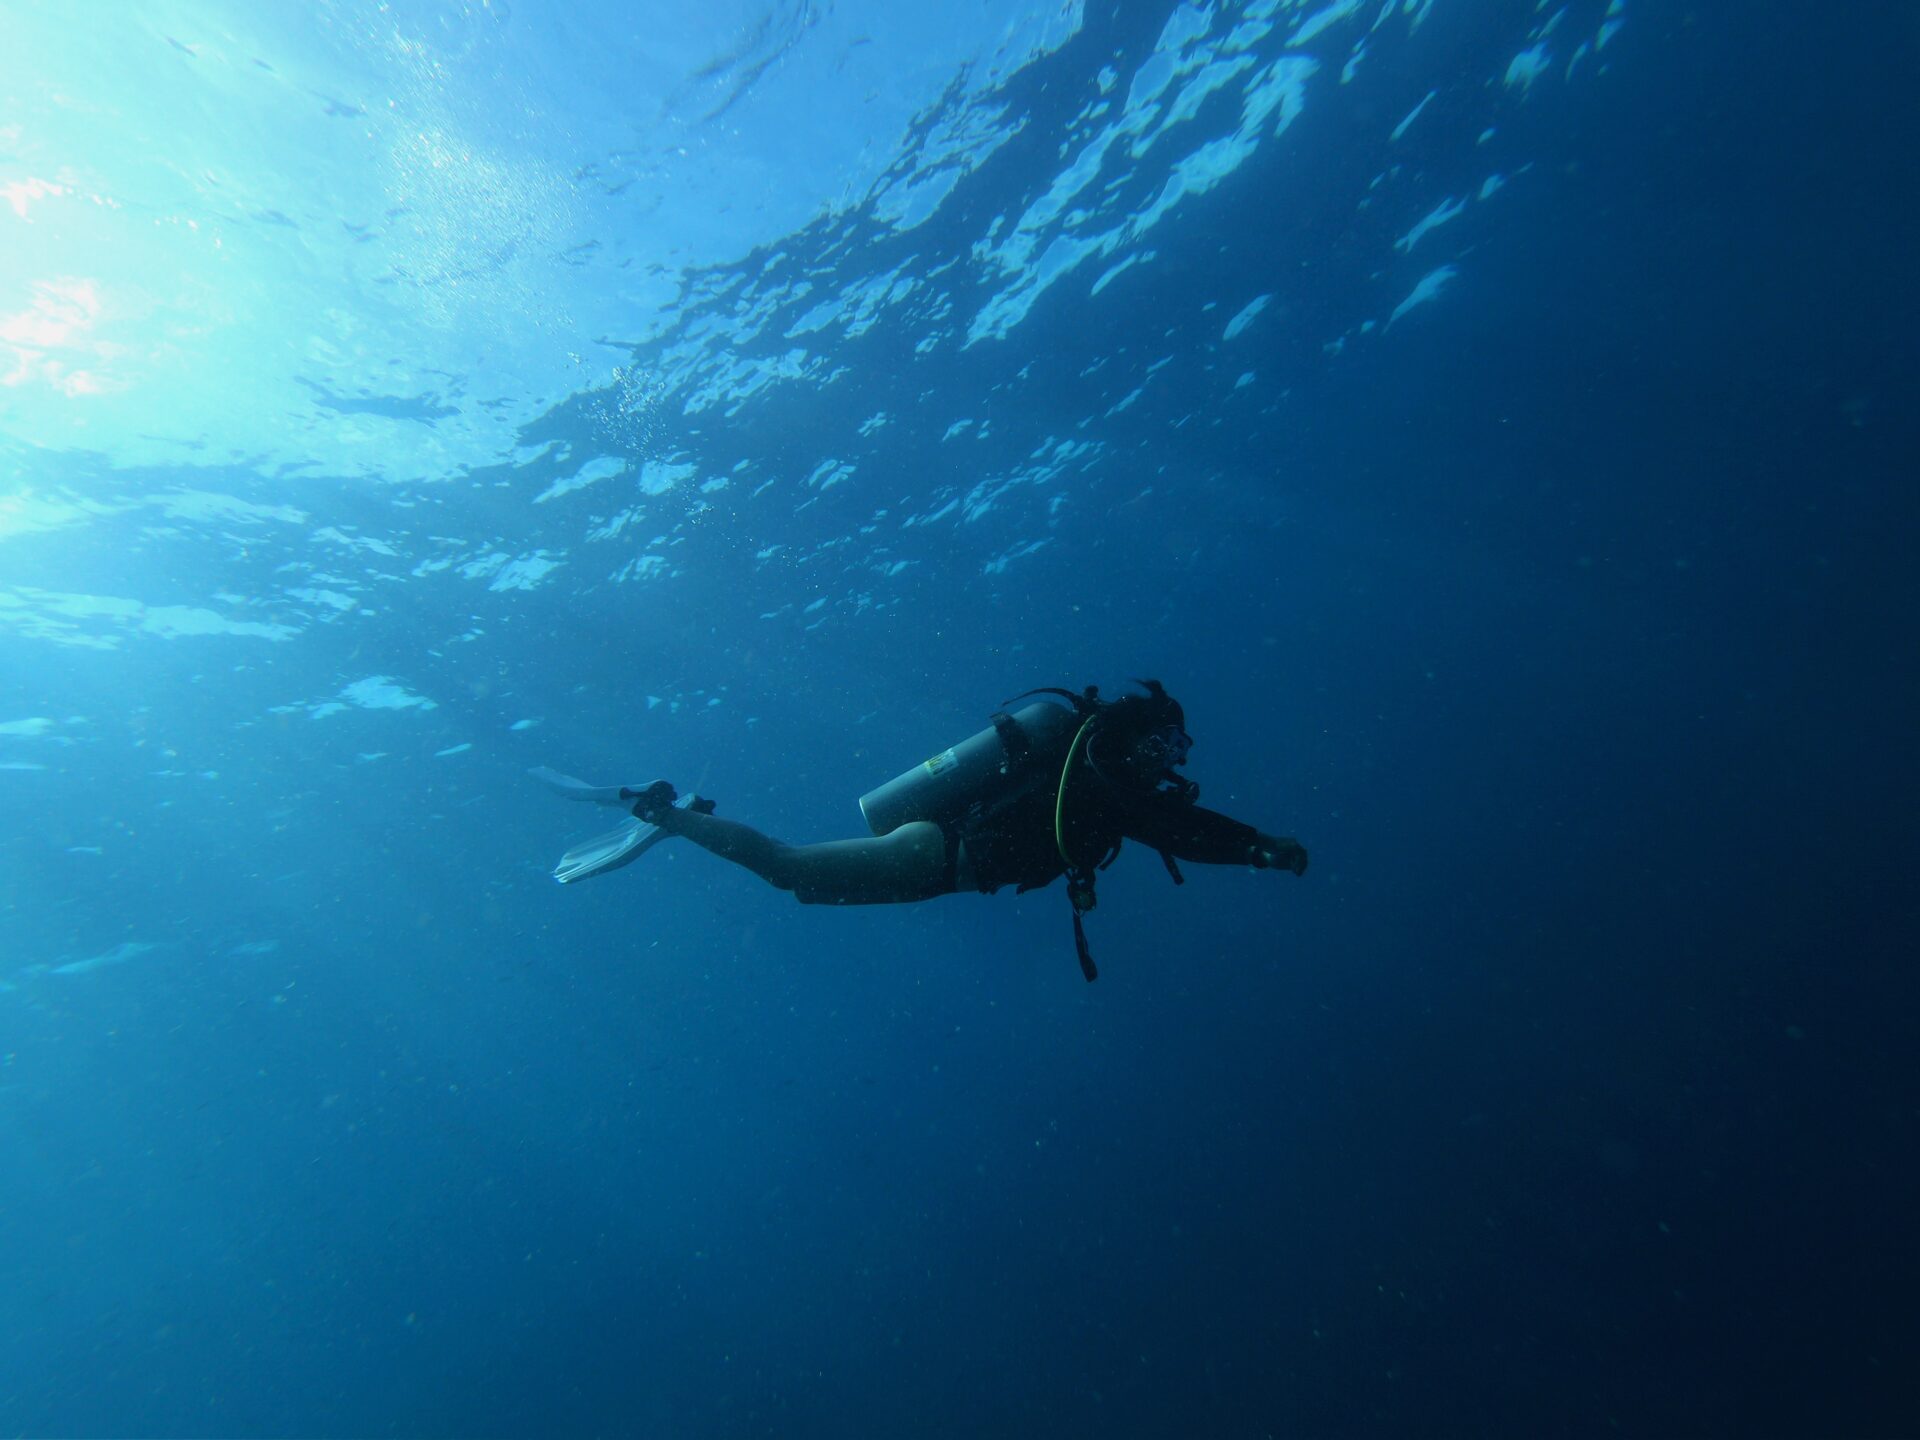 A female scuba diver floats alone in a clear, blue sea. There is only water around her. We can see the sun’s rays coming down from the surface. She is facing to the right and is completely horizontal as she swims.